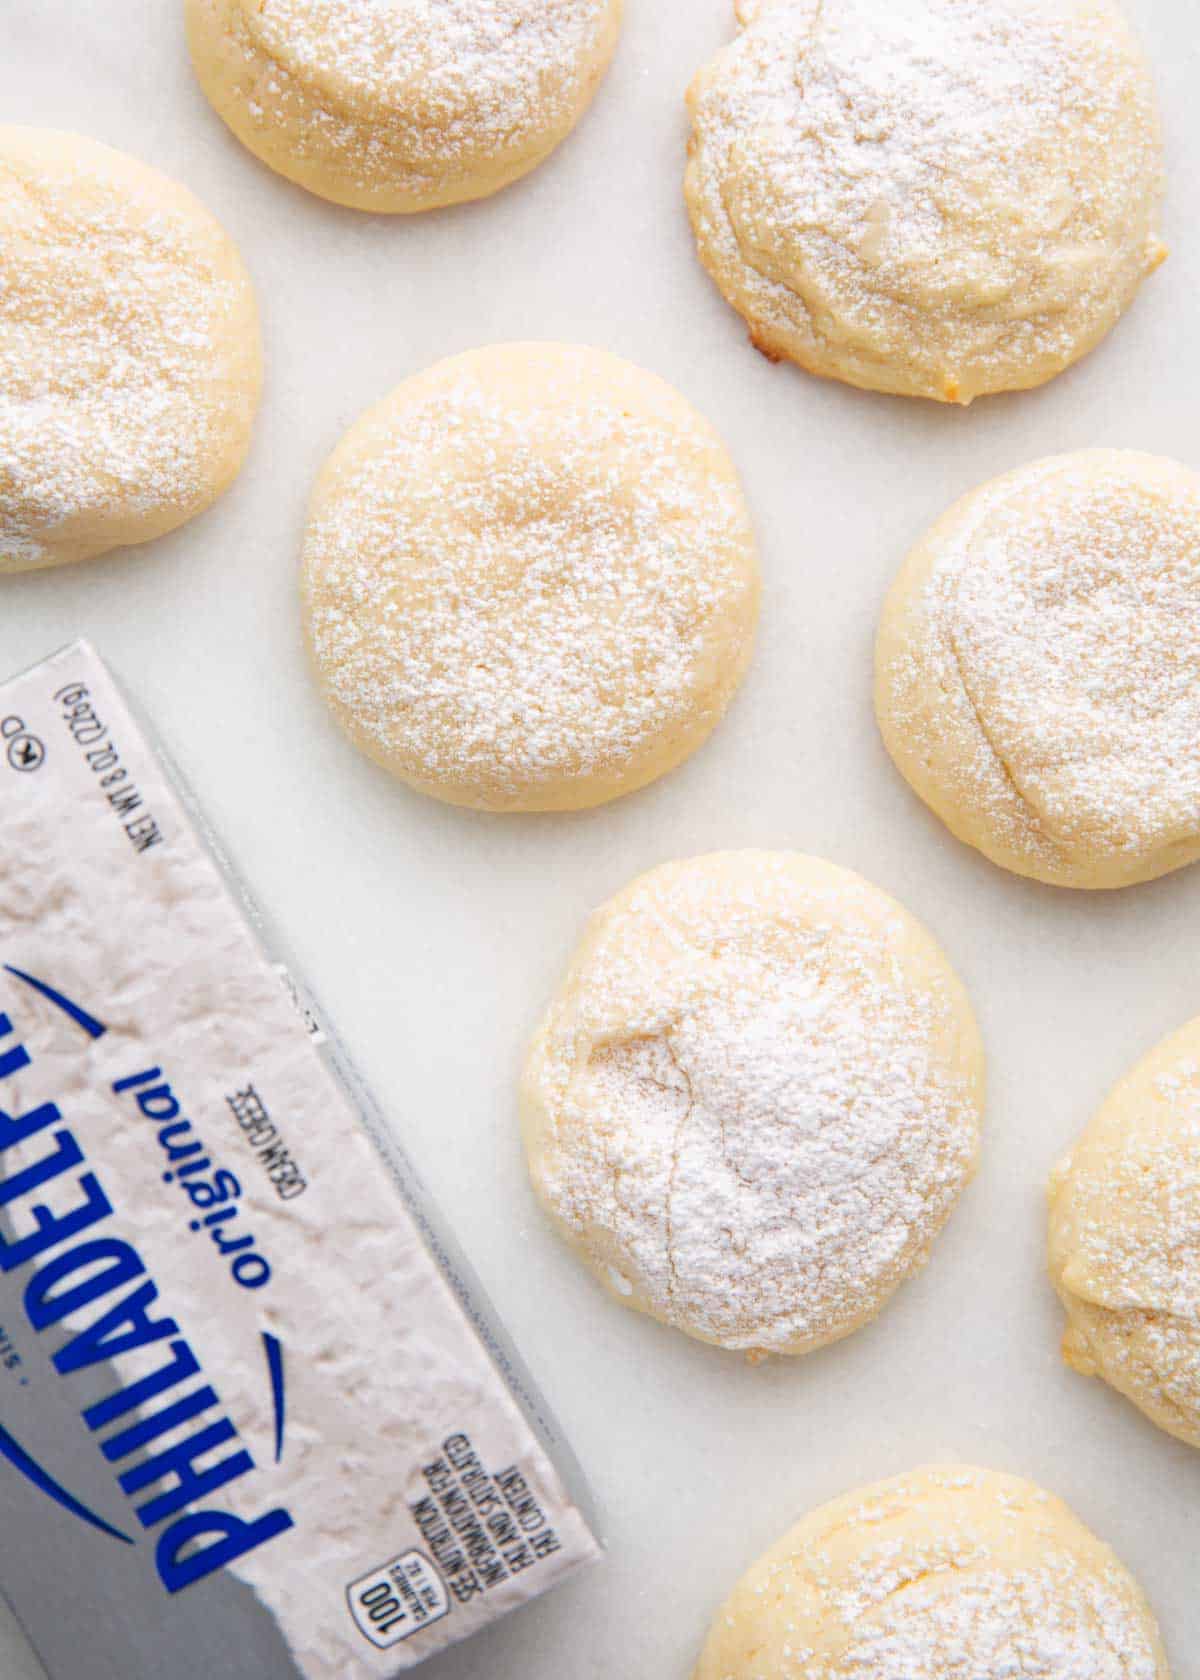 The best cream cheese cookies on the counter.